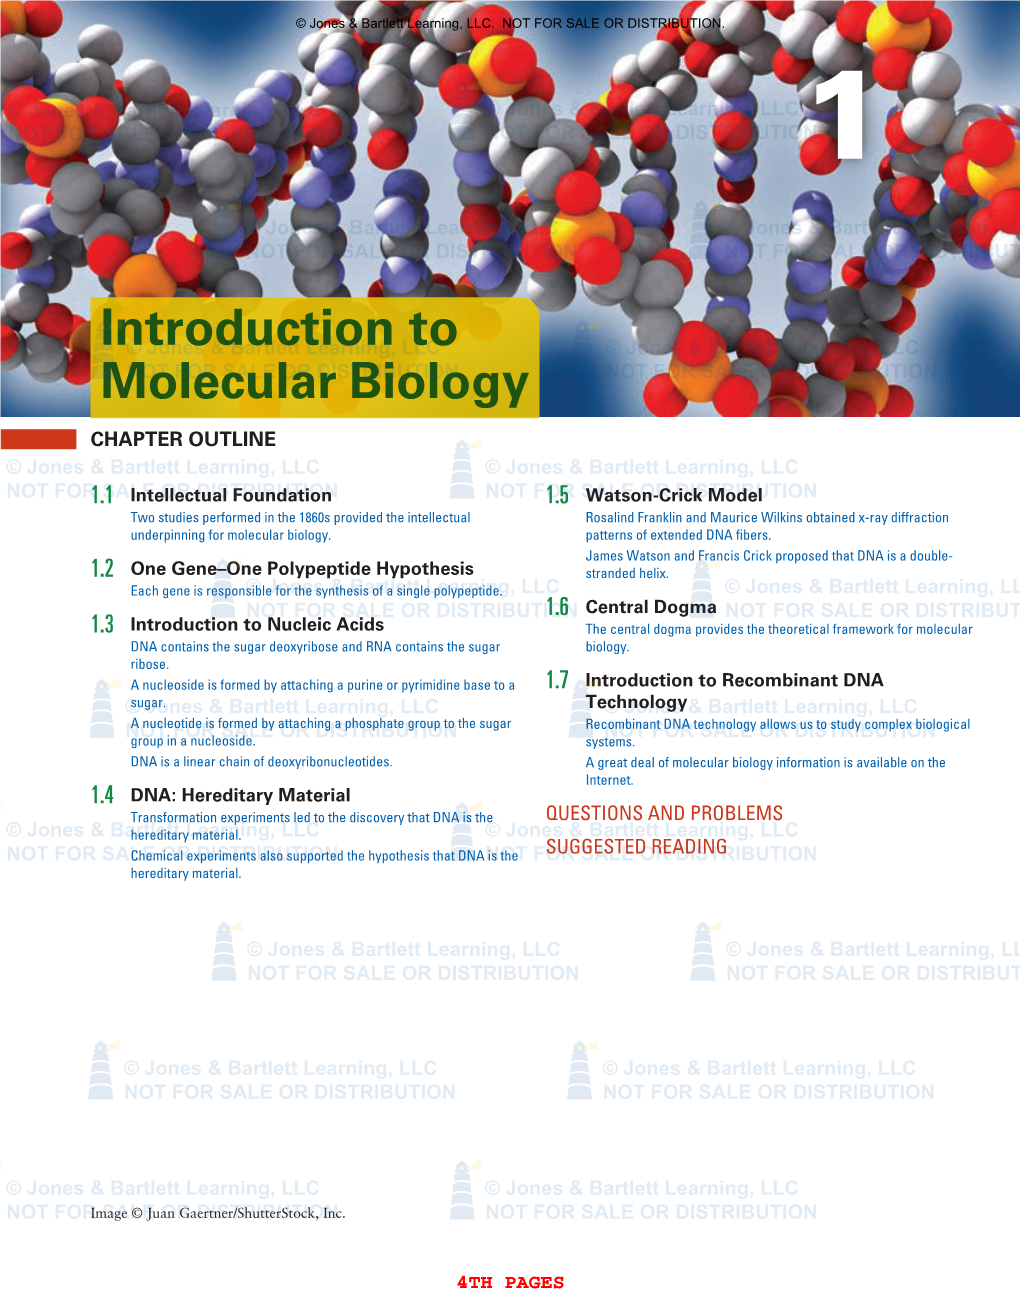 INTRODUCTION to MOLECULAR BIOLOGY 4TH PAGES © Jones & Bartlett Learning, LLC